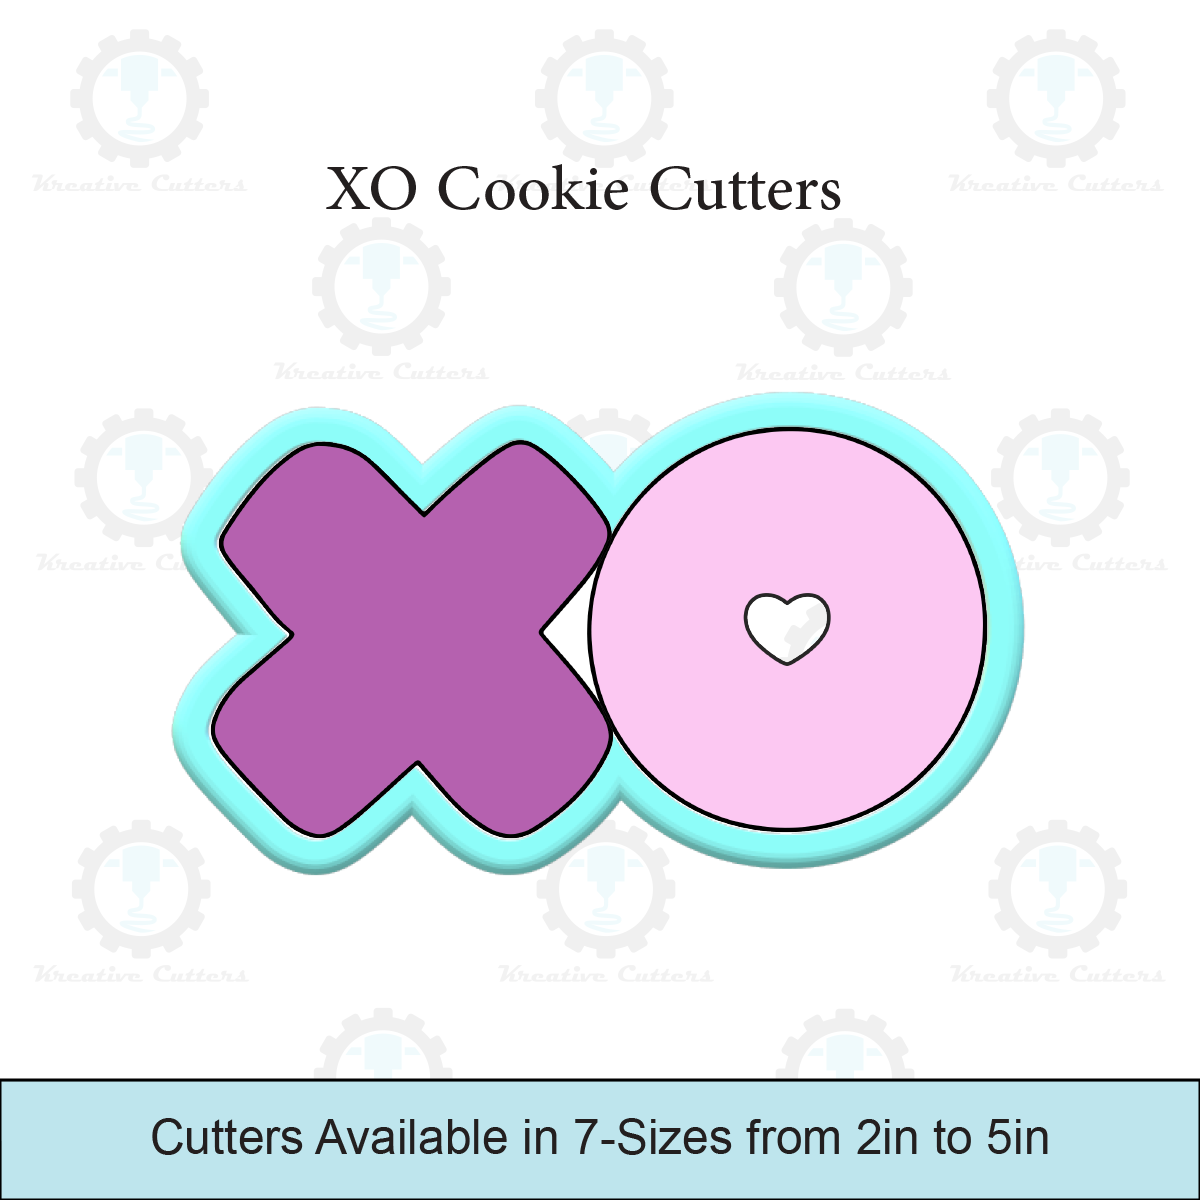 XO Cookie Cutters